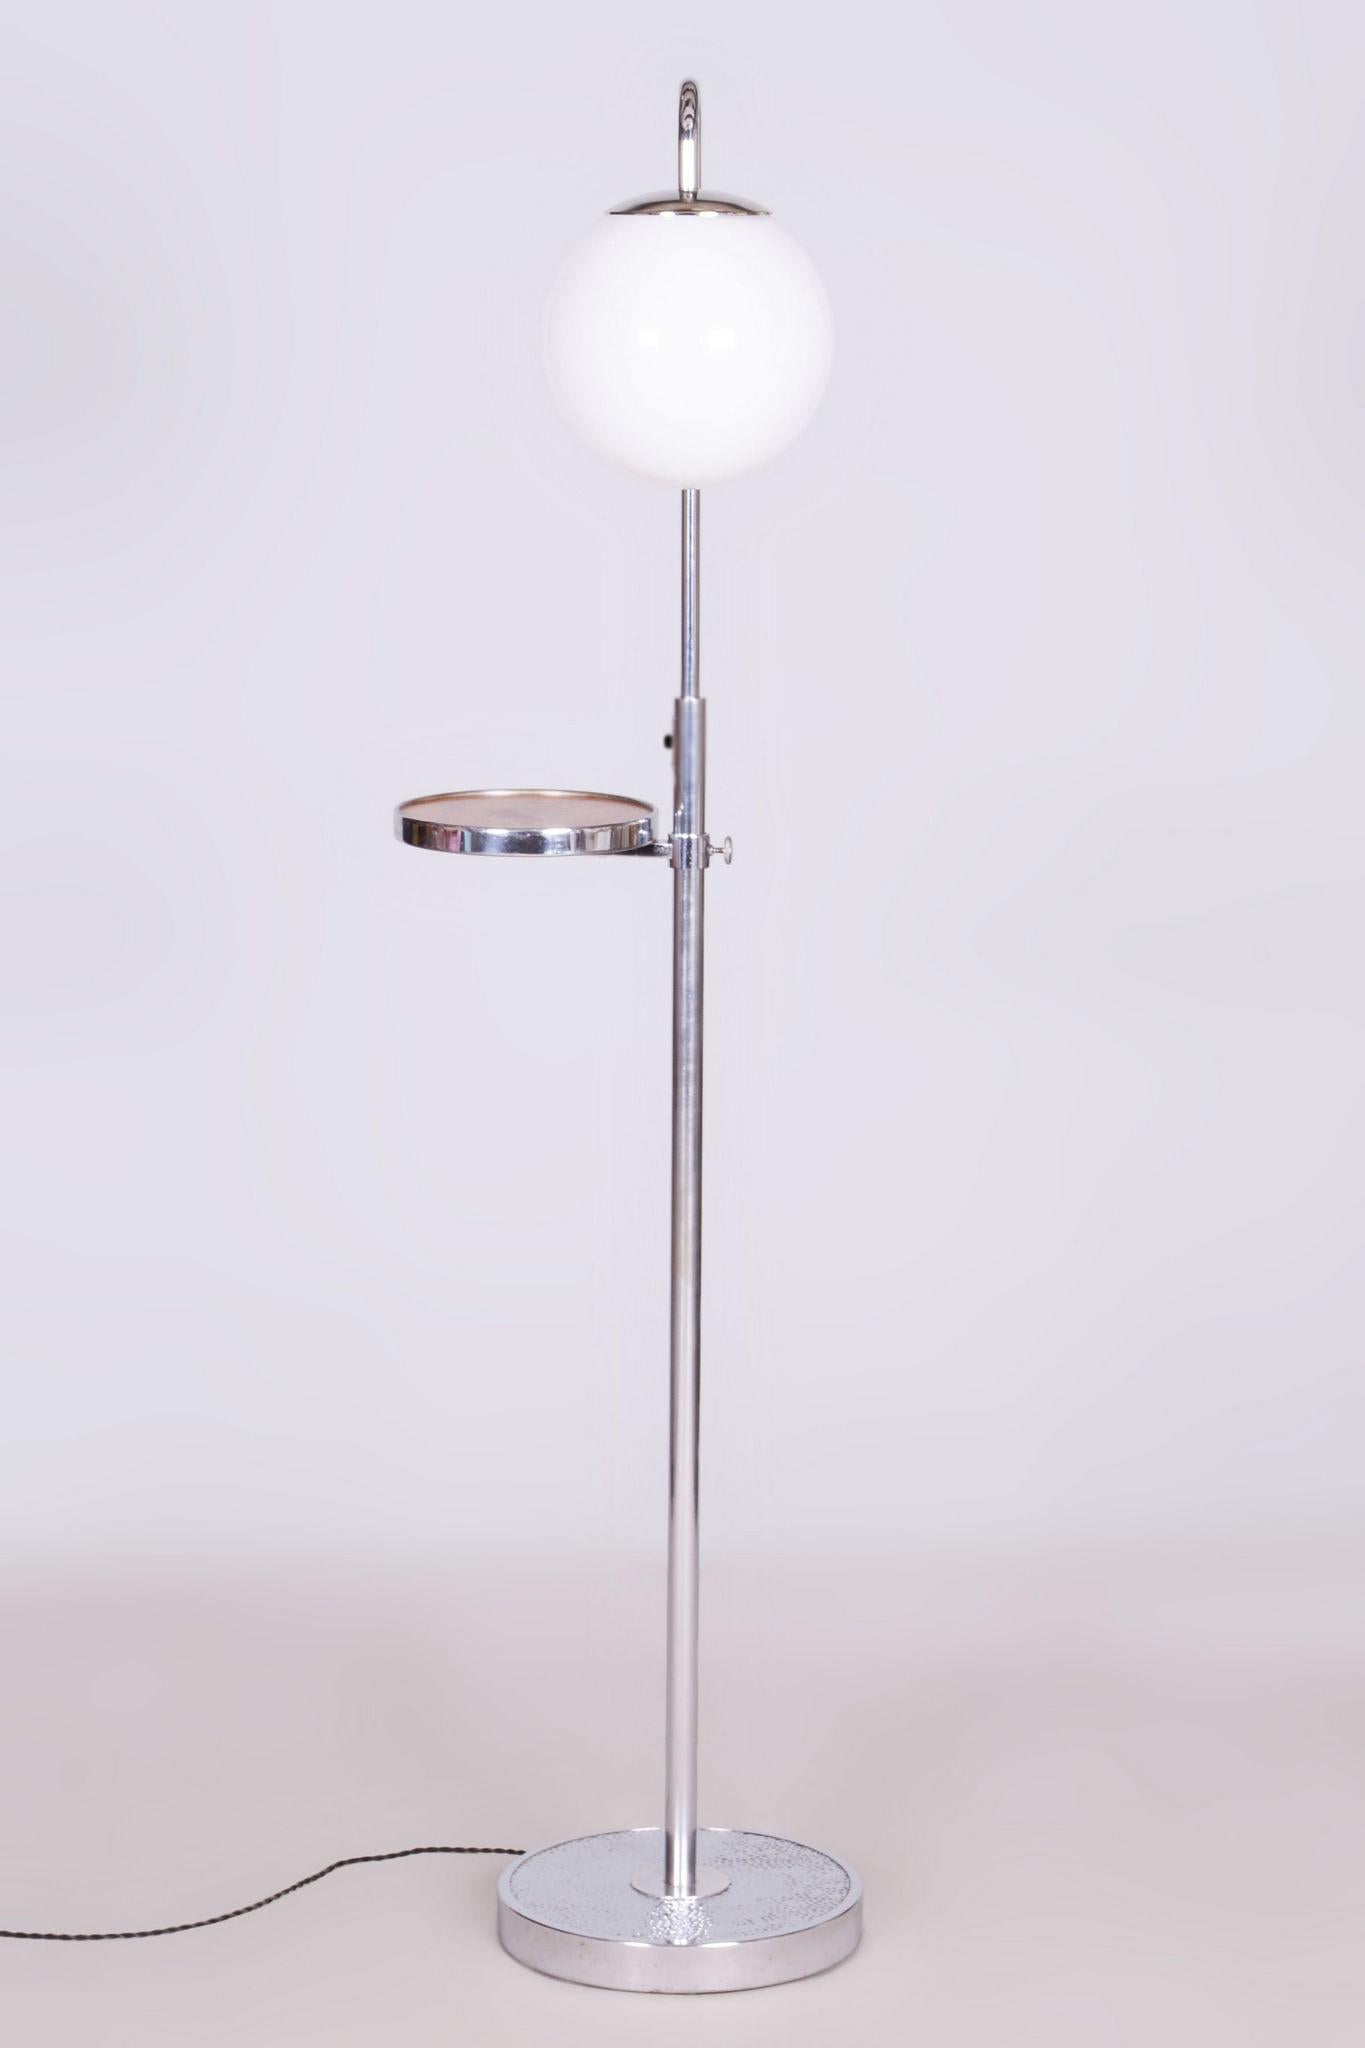 Restored Bauhaus Floor Lamp Made by Hynek Gottwald.

Material: Chrome-plated Steel, Milk Glass
Maker: Hynek Gottwald
Source: Czechia 
New electrification.
The diameter of the ball is 25cm.

The chrome parts have been cleaned and professionally